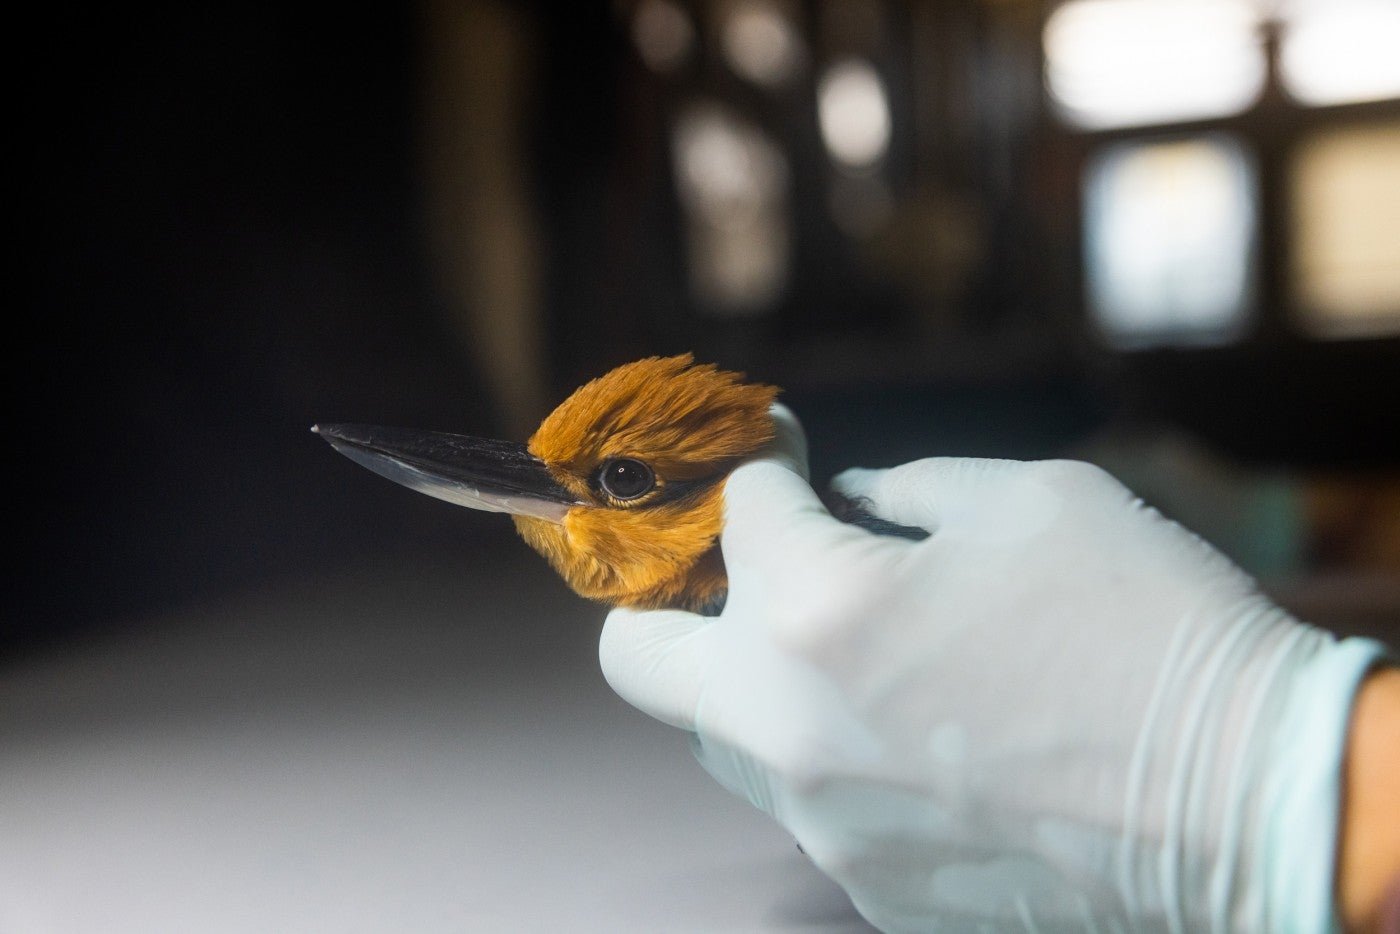 An animal keeper holds a Guam kingfisher bird in gloved hands